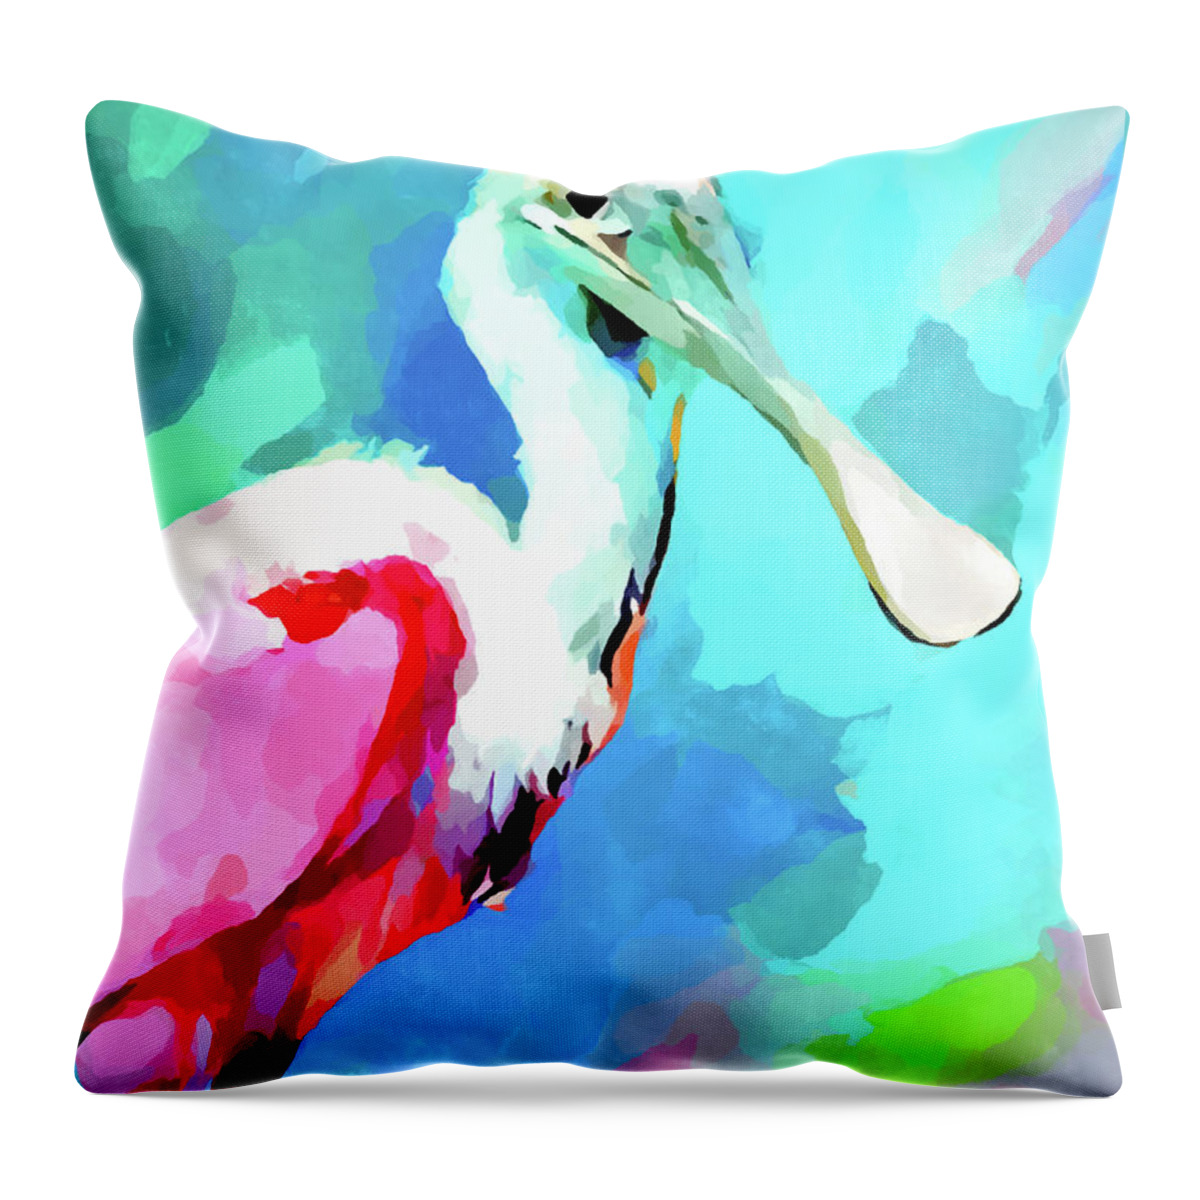 Roseate Spoonbill Throw Pillow featuring the painting Roseate Spoonbill by Chris Butler